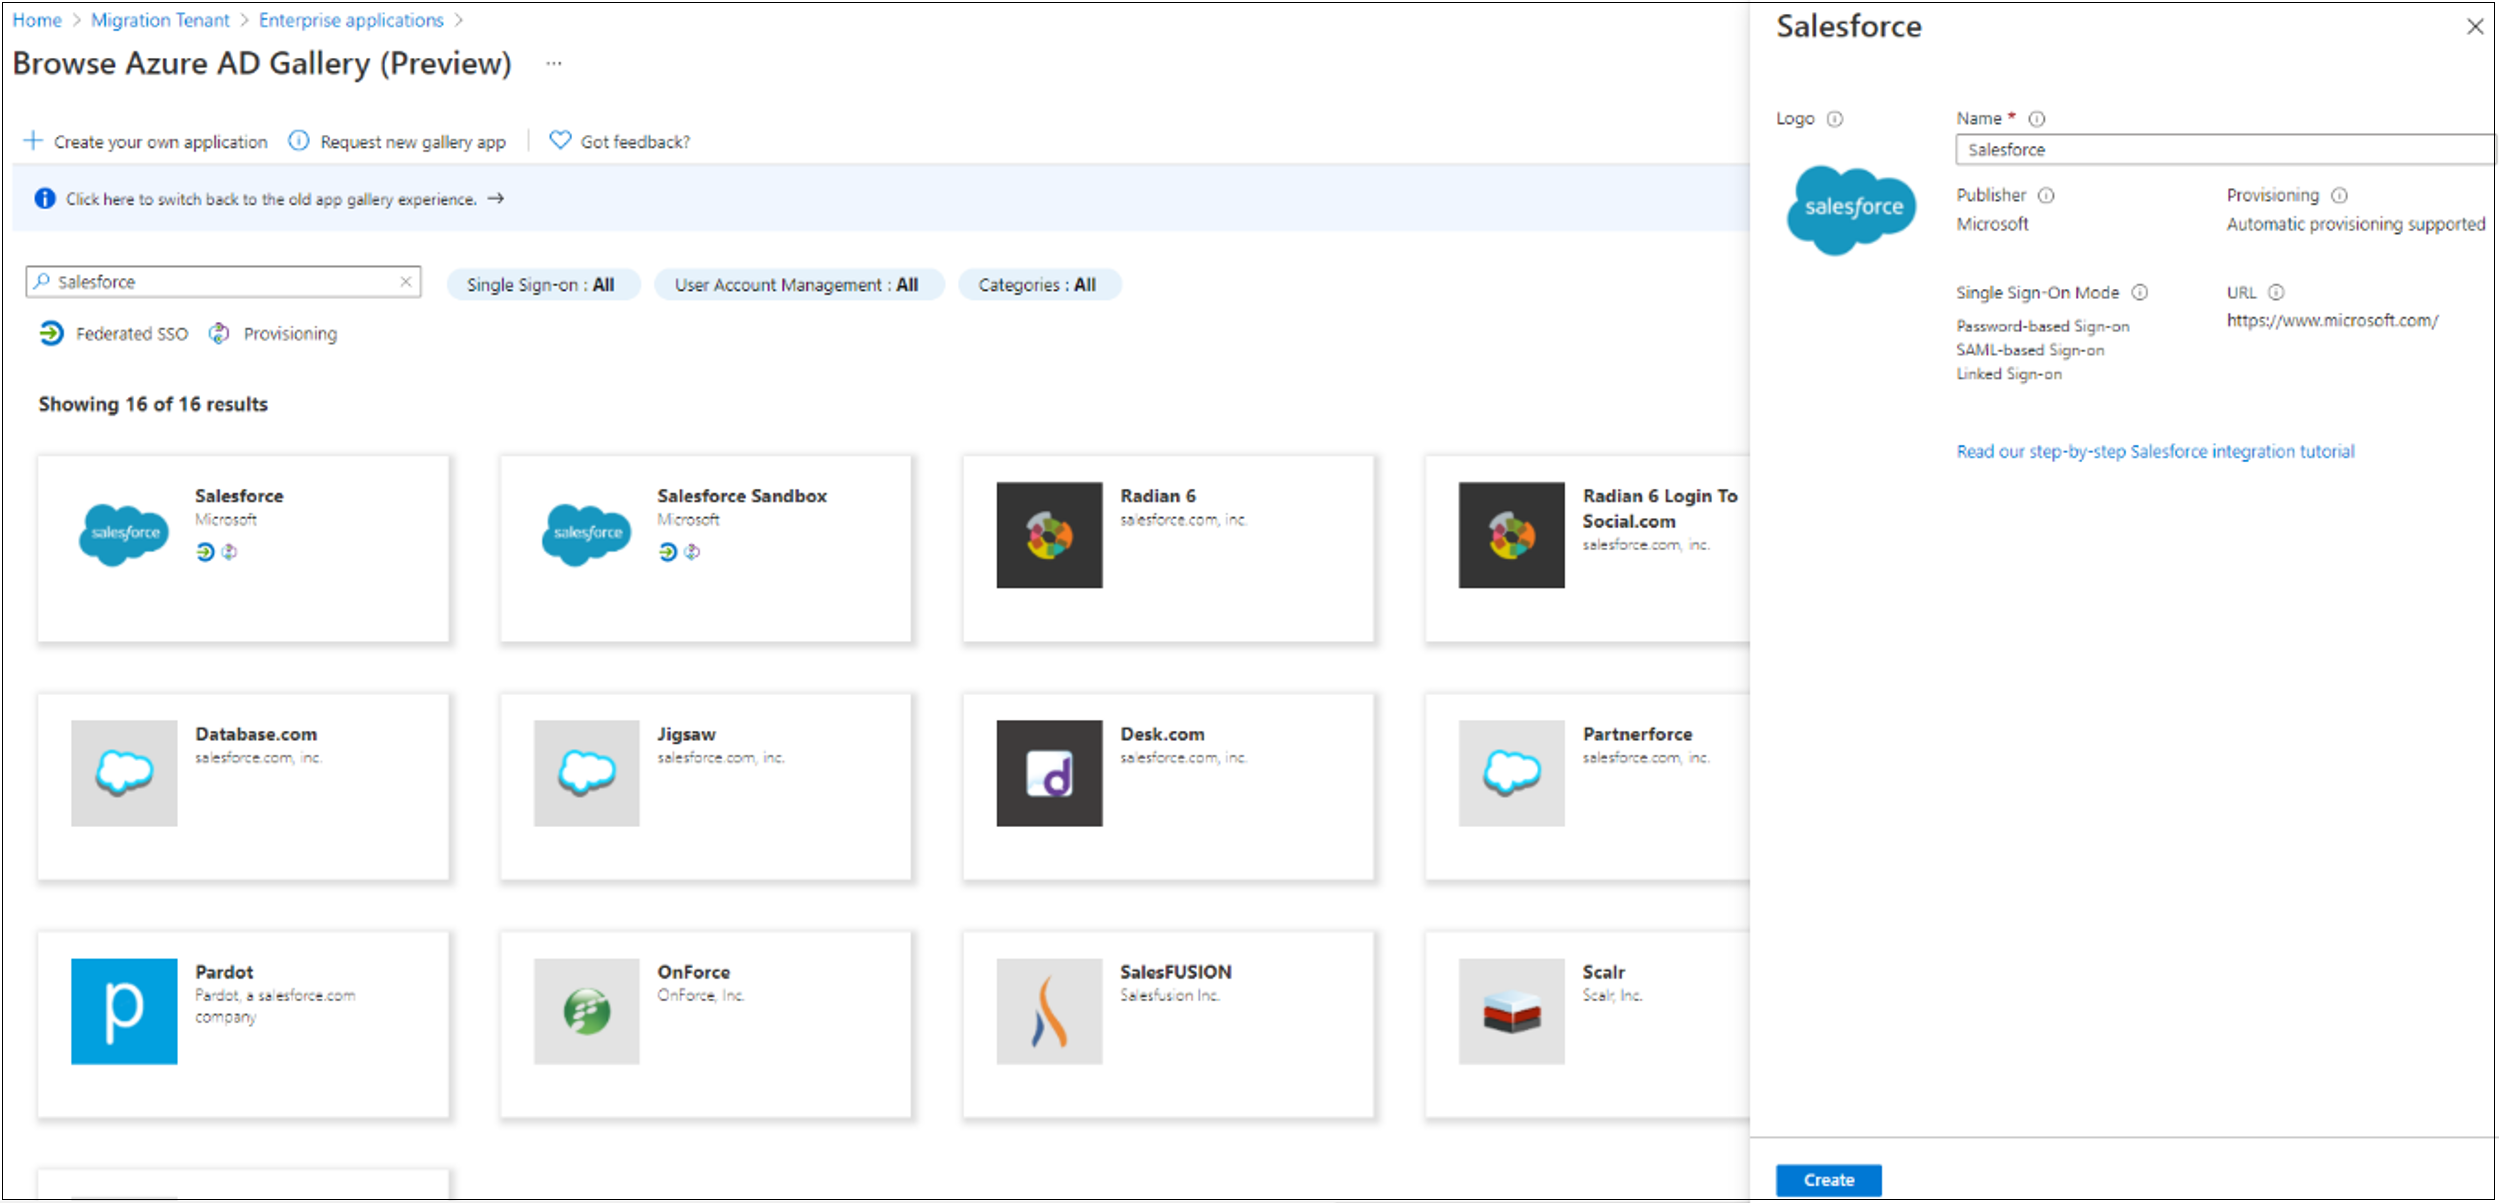 Screenshot that shows the Salesforce application in Azure A D Gallery.